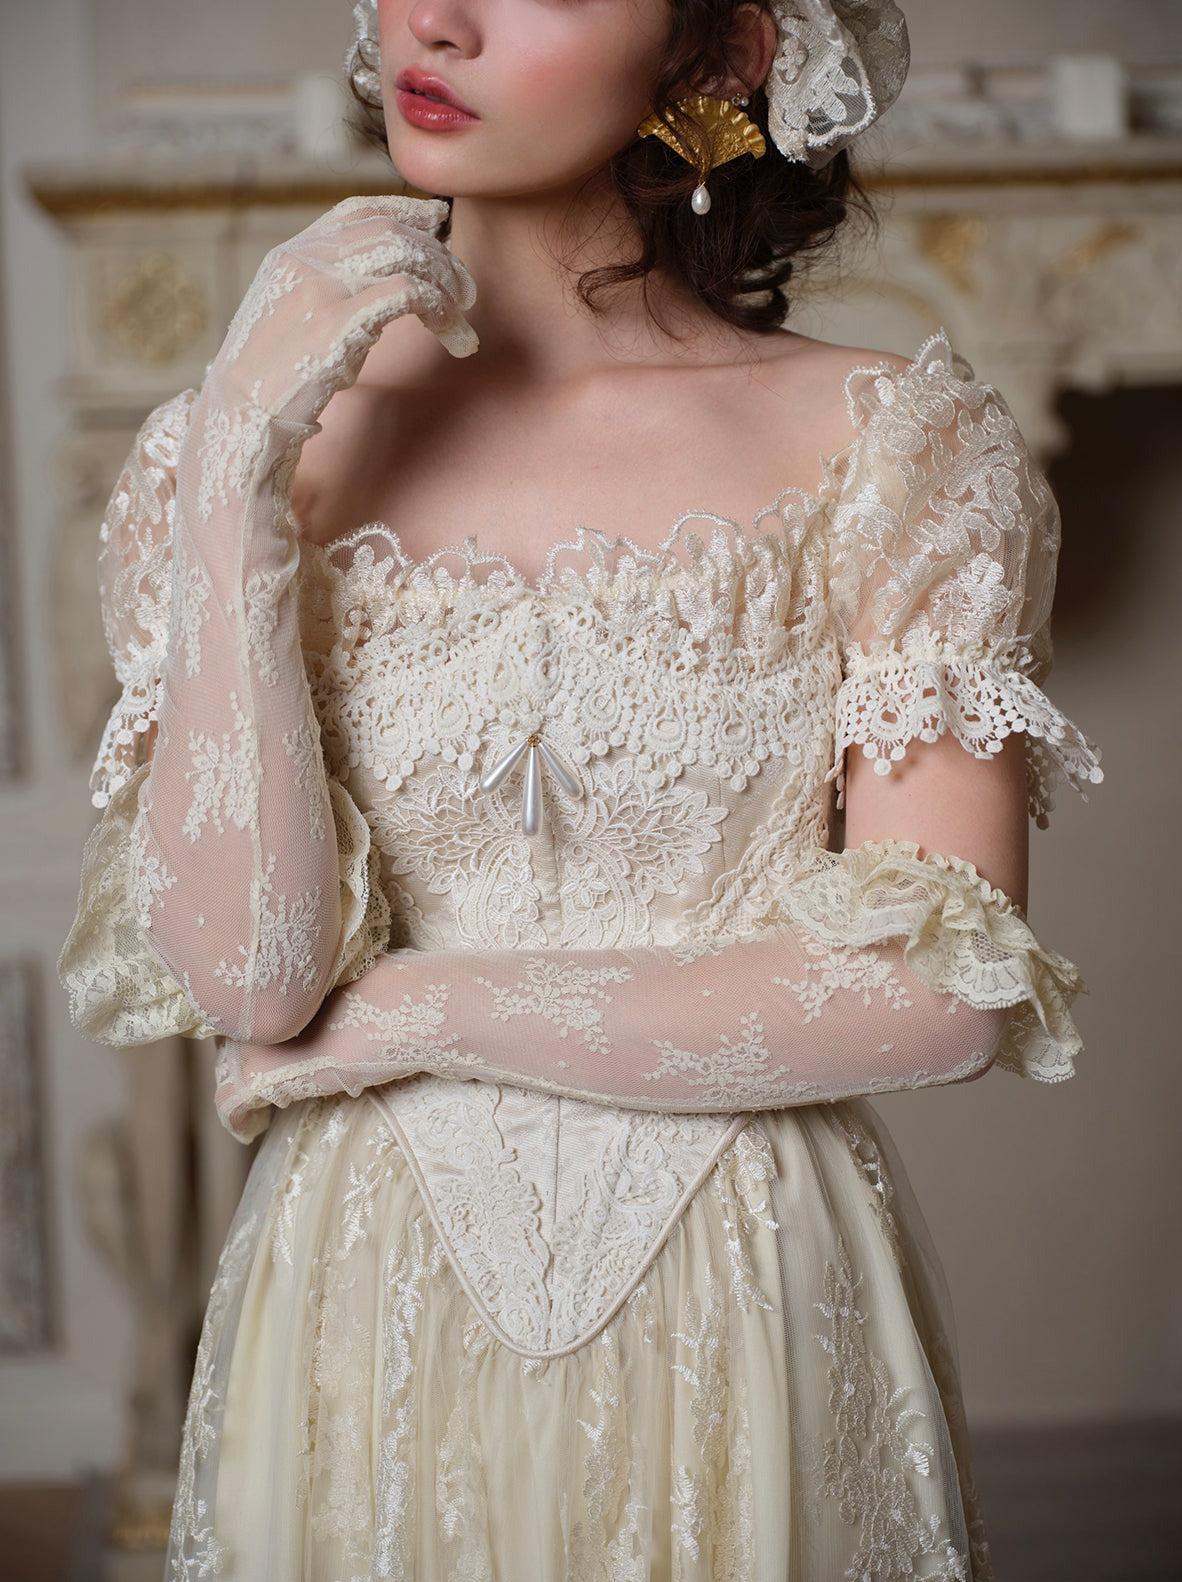 Retro Lace Puff Sleeve Long Dress + Lace Gloves